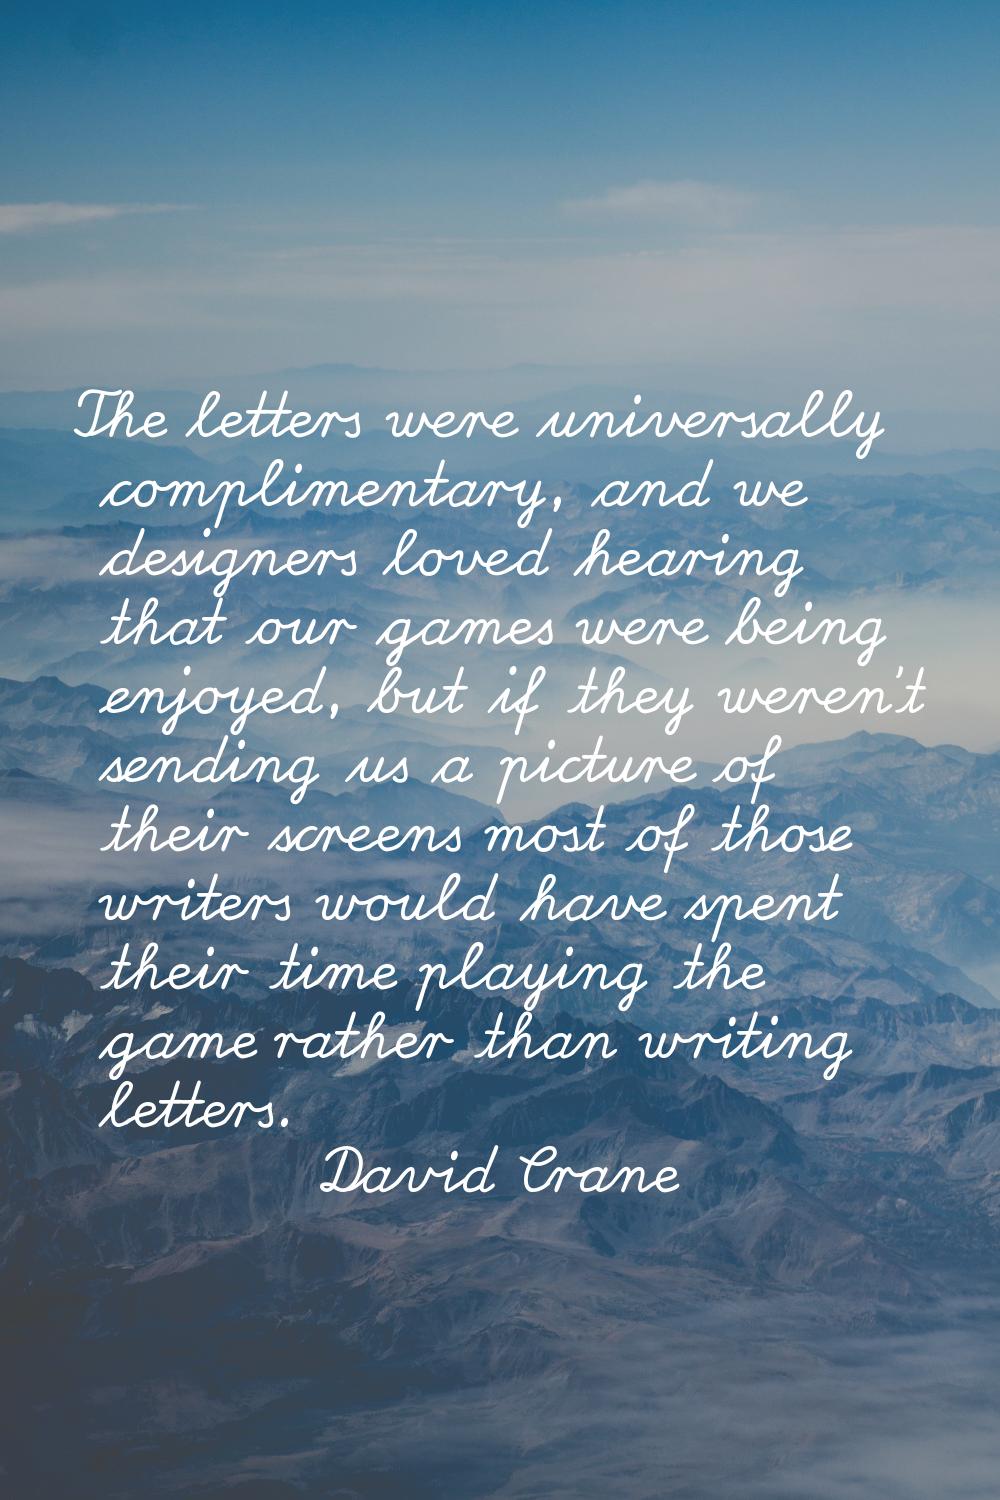 The letters were universally complimentary, and we designers loved hearing that our games were bein